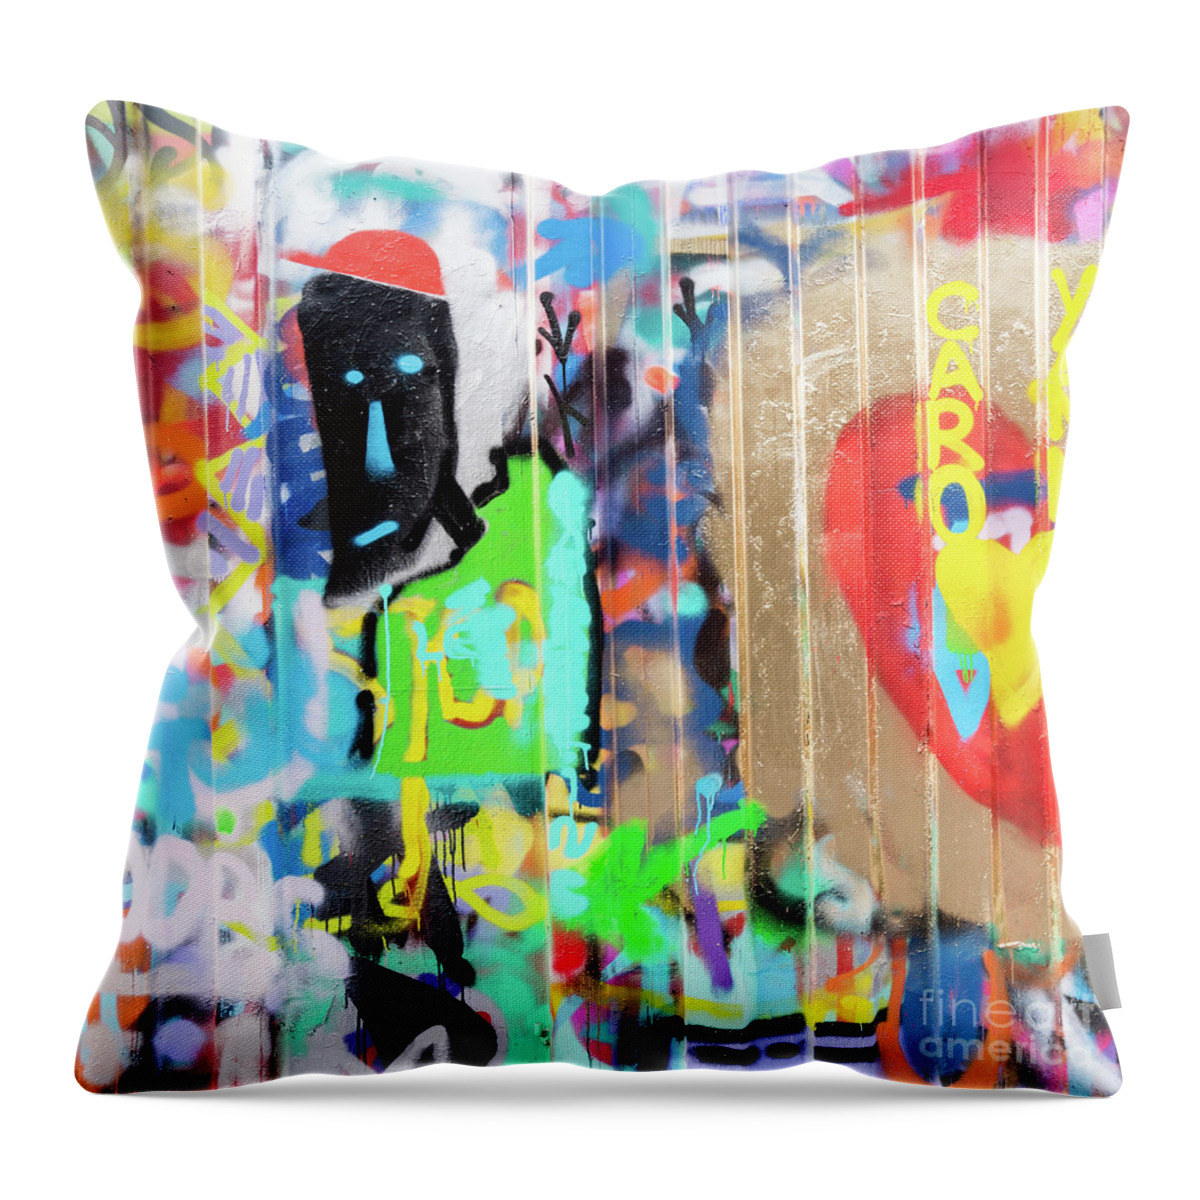 Graffiti Throw Pillow featuring the photograph Graffiti 5 by Delphimages Photo Creations